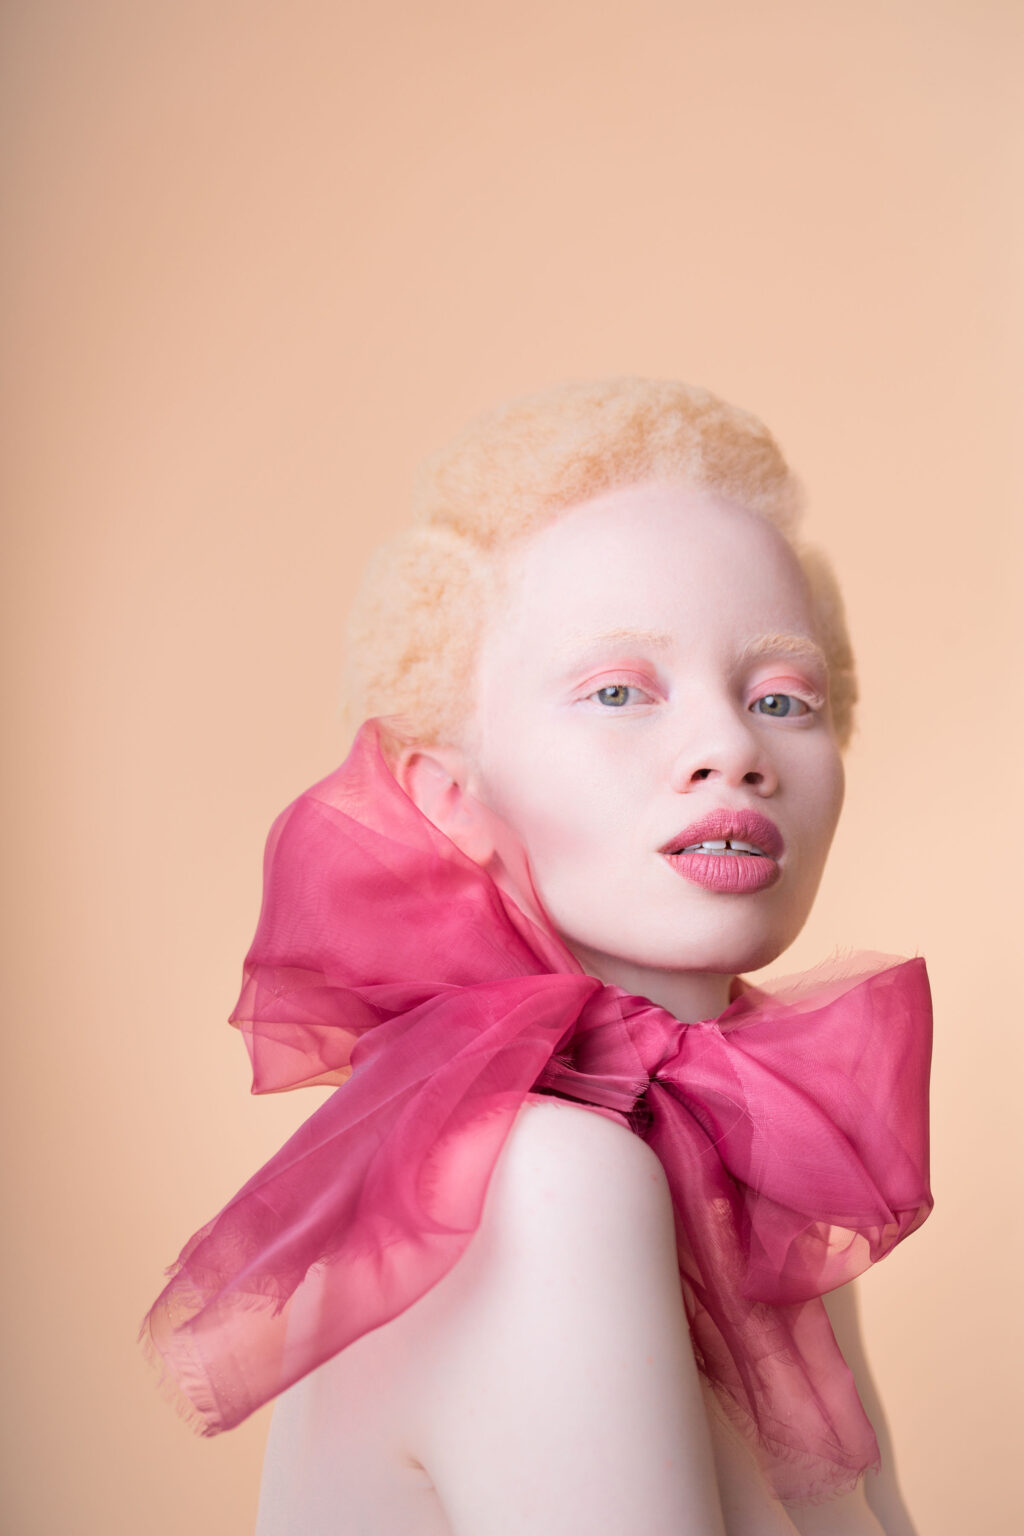 REDEFINING THE DNA OF BEAUTY: An Interview with Thando Hopa